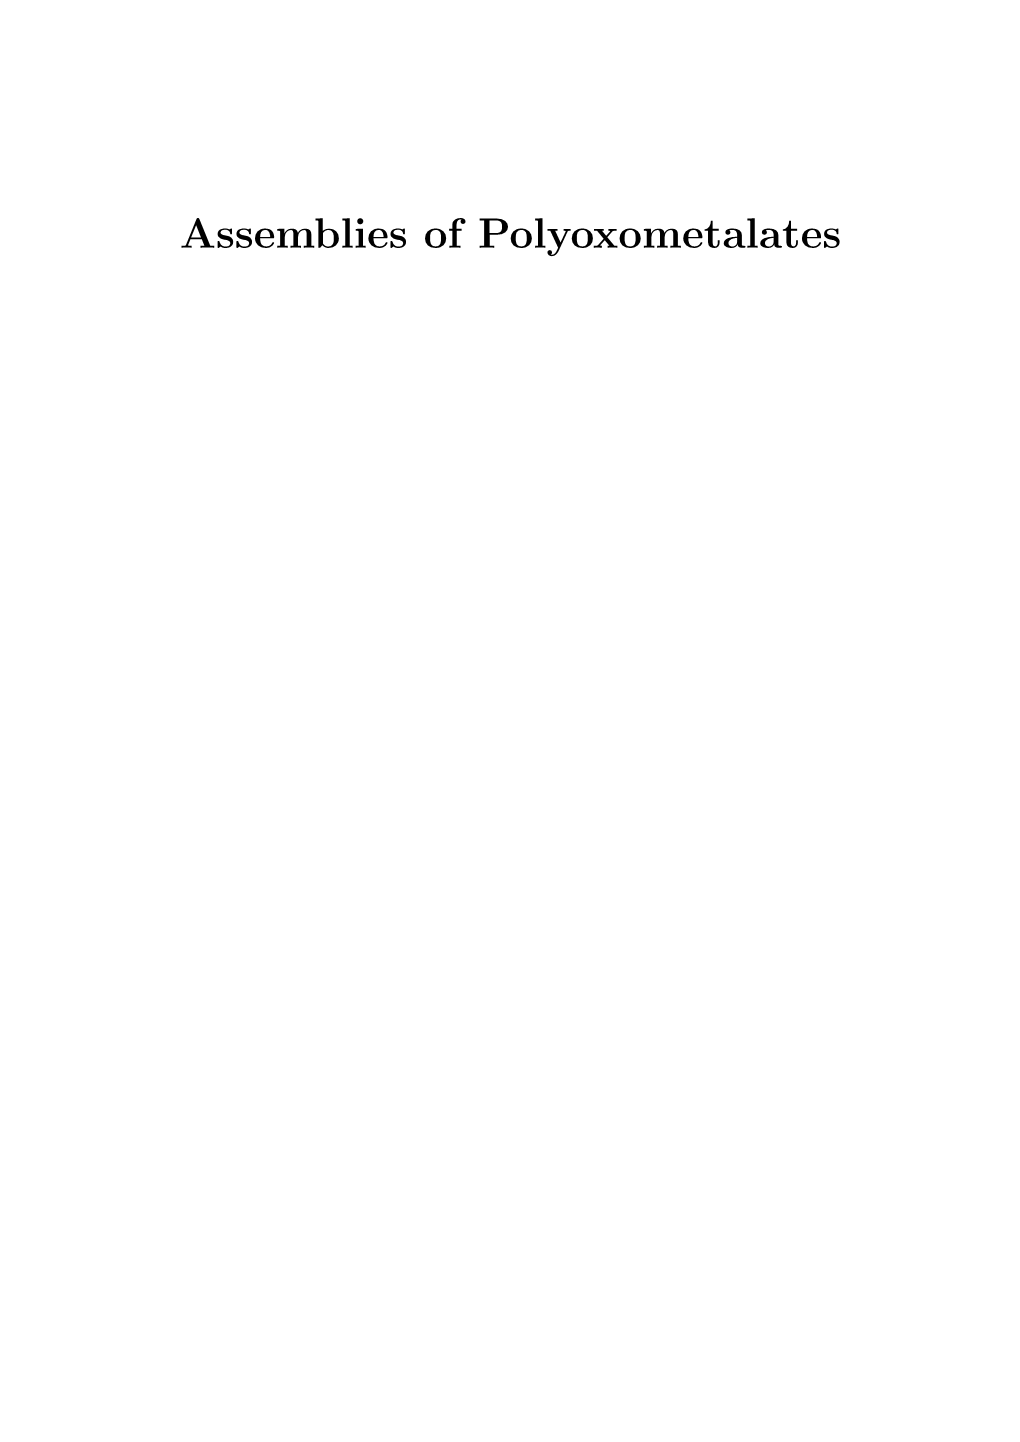 Assemblies of Polyoxometalates Cover Picture by A.A